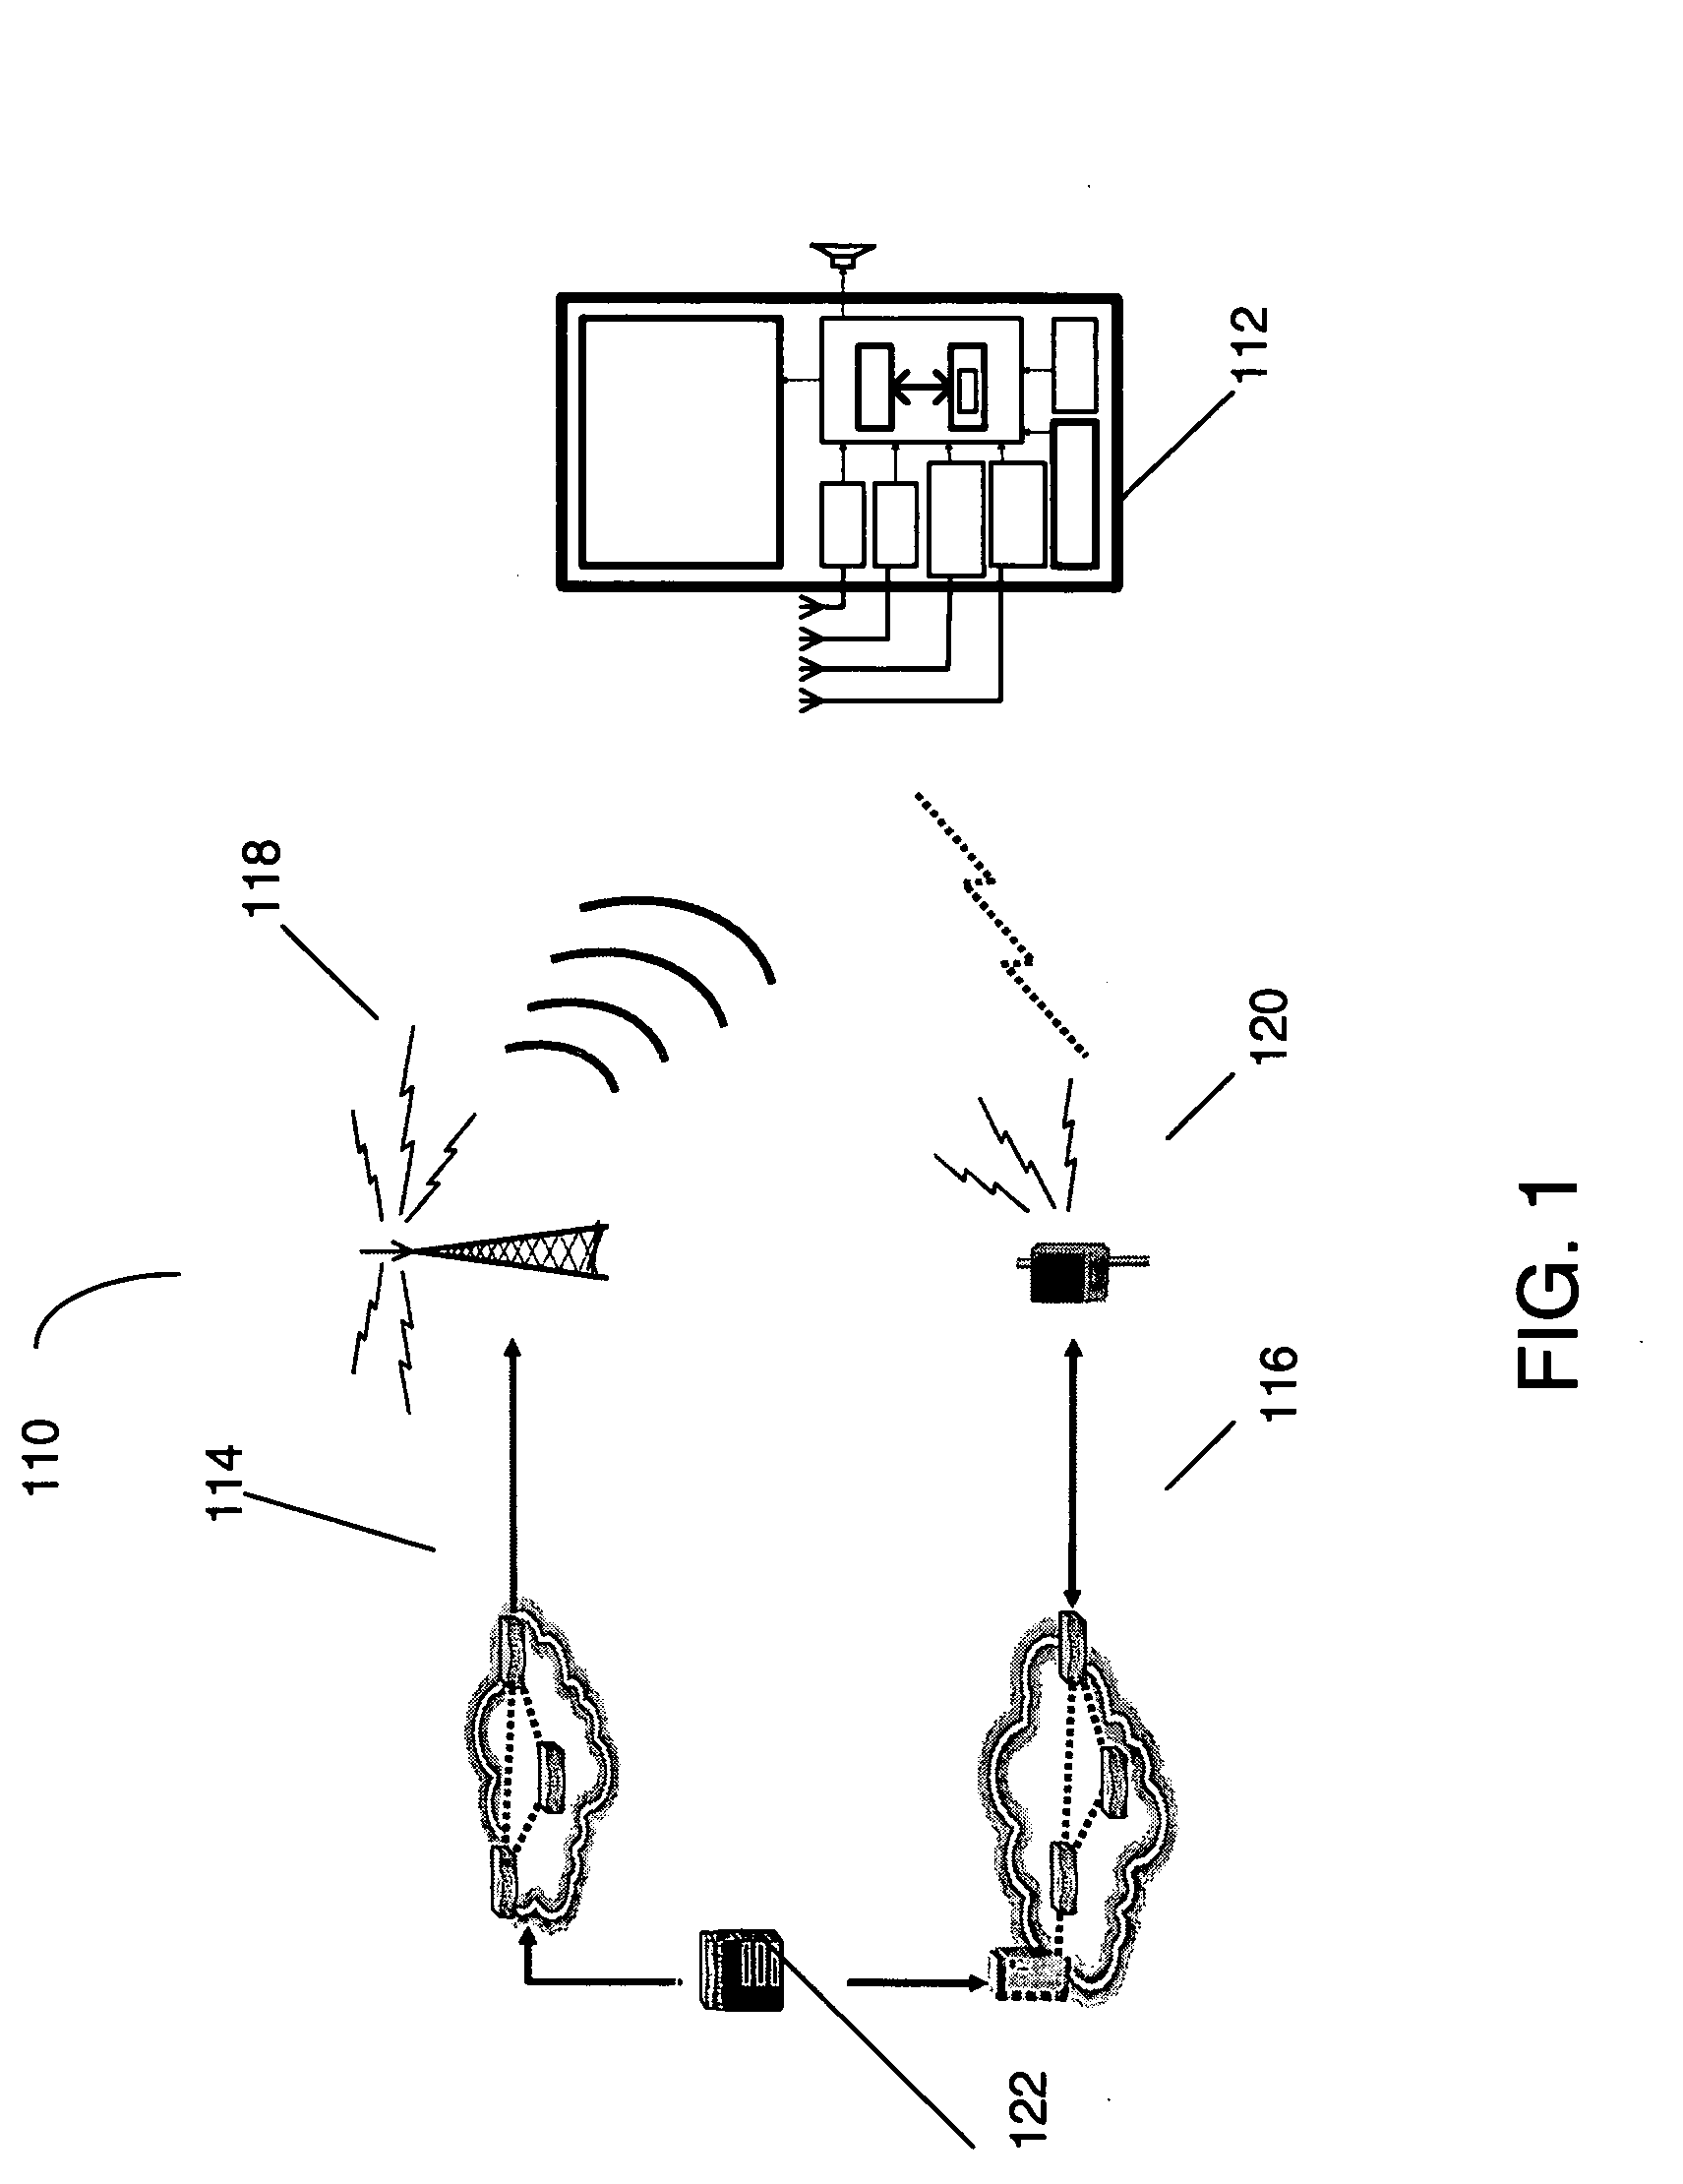 Mobile TV channel and service access filtering